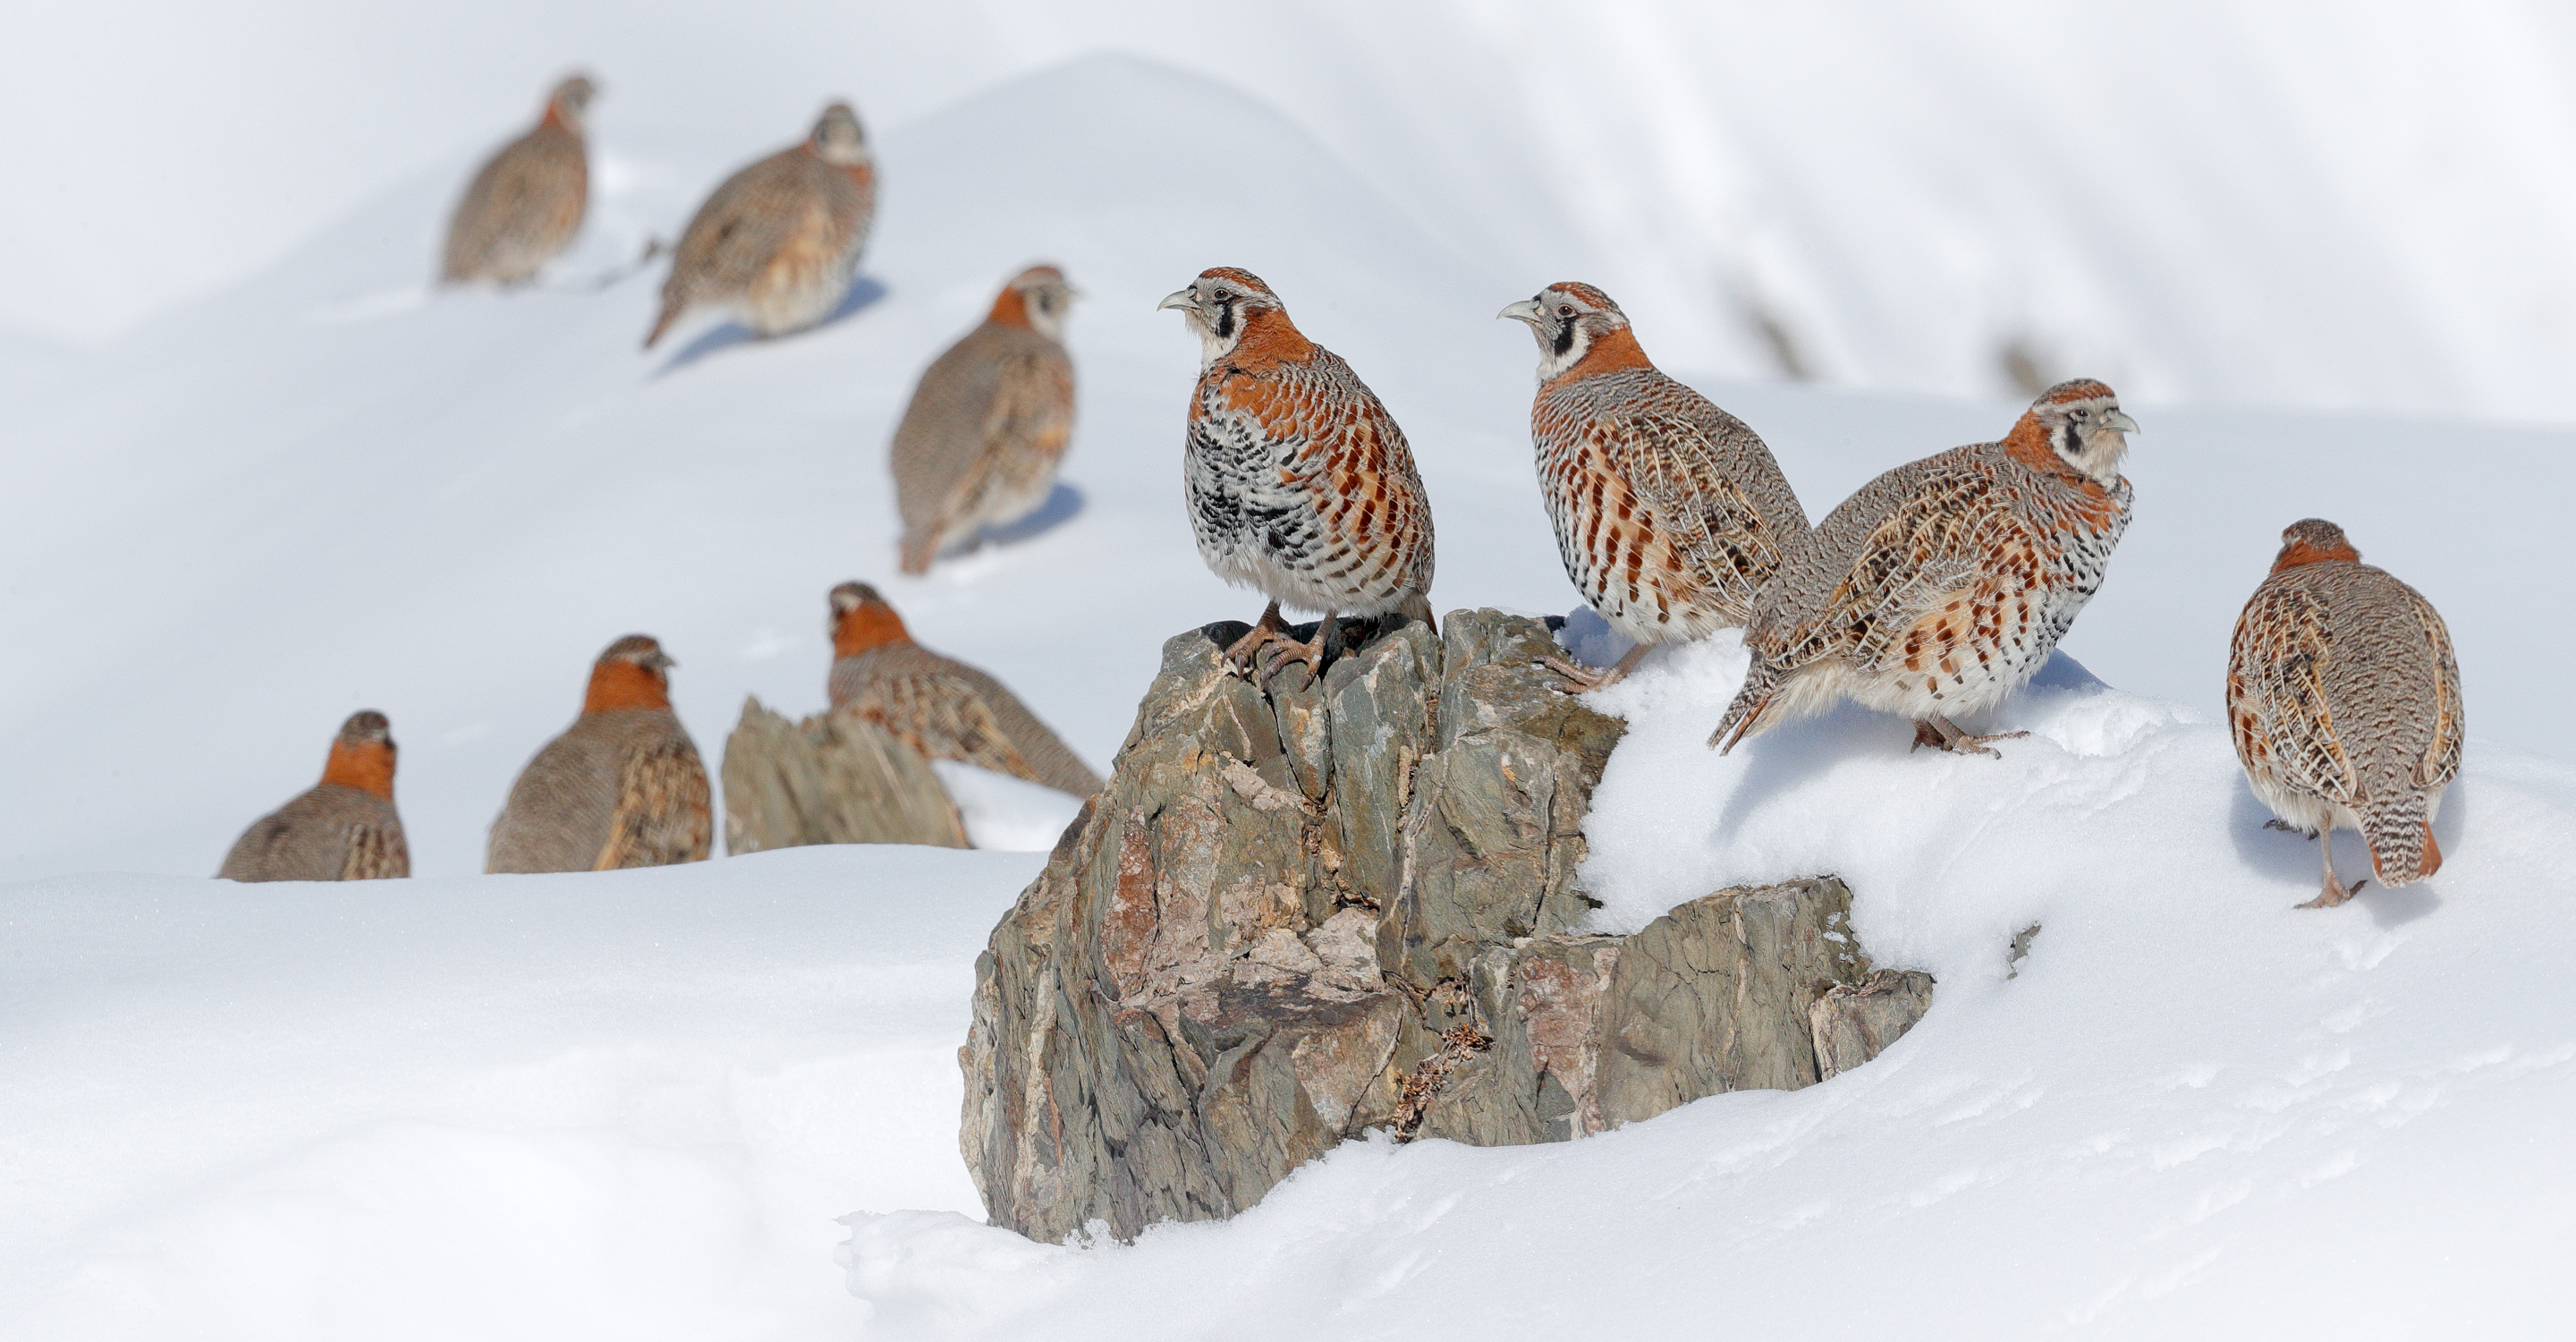 A group of Tibetan partridges sit in the snow of the Himalaya mountain range, India